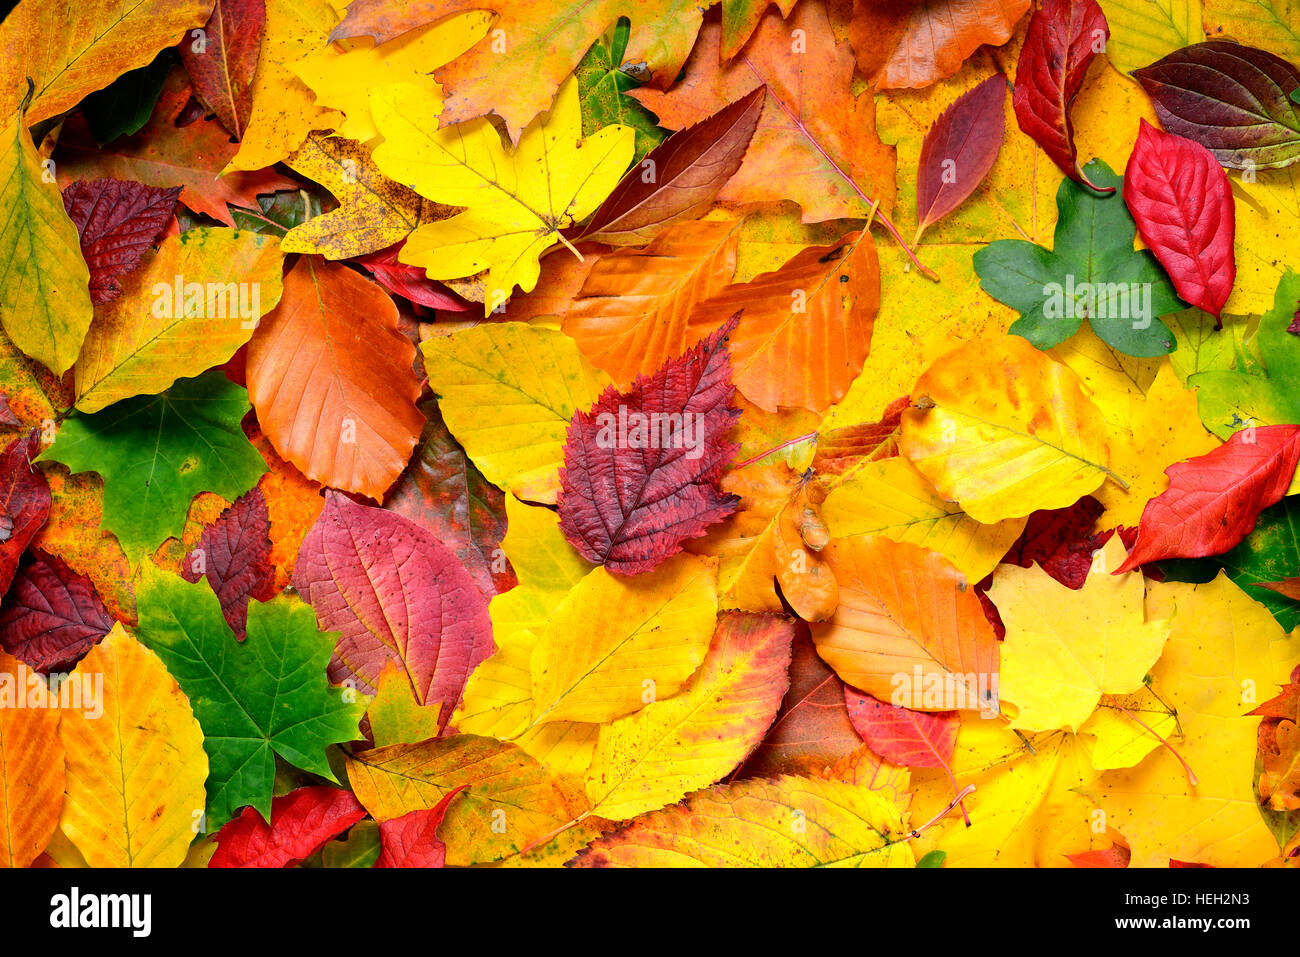 116f 1216152 hi-res stock photography and images - Alamy